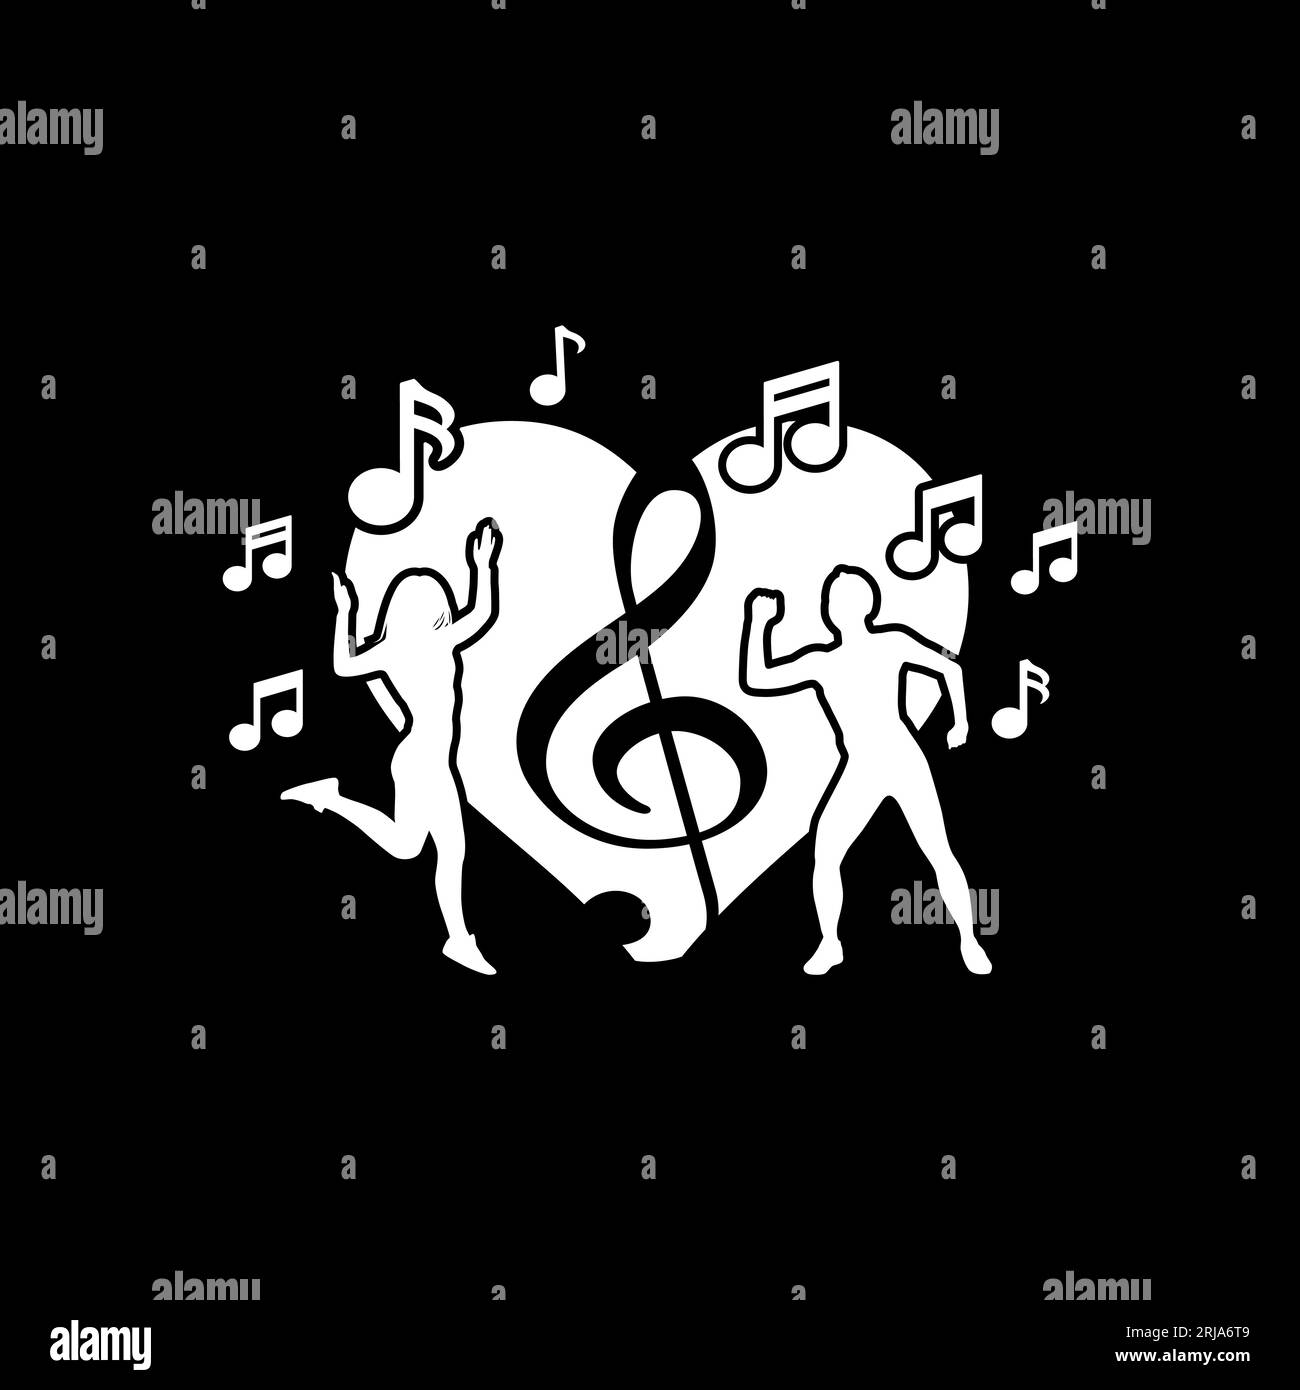 Love Heart With Dancing People Silhouettes And Tone Melody For Dance Studio Or Dance Club Logo Stock Vector